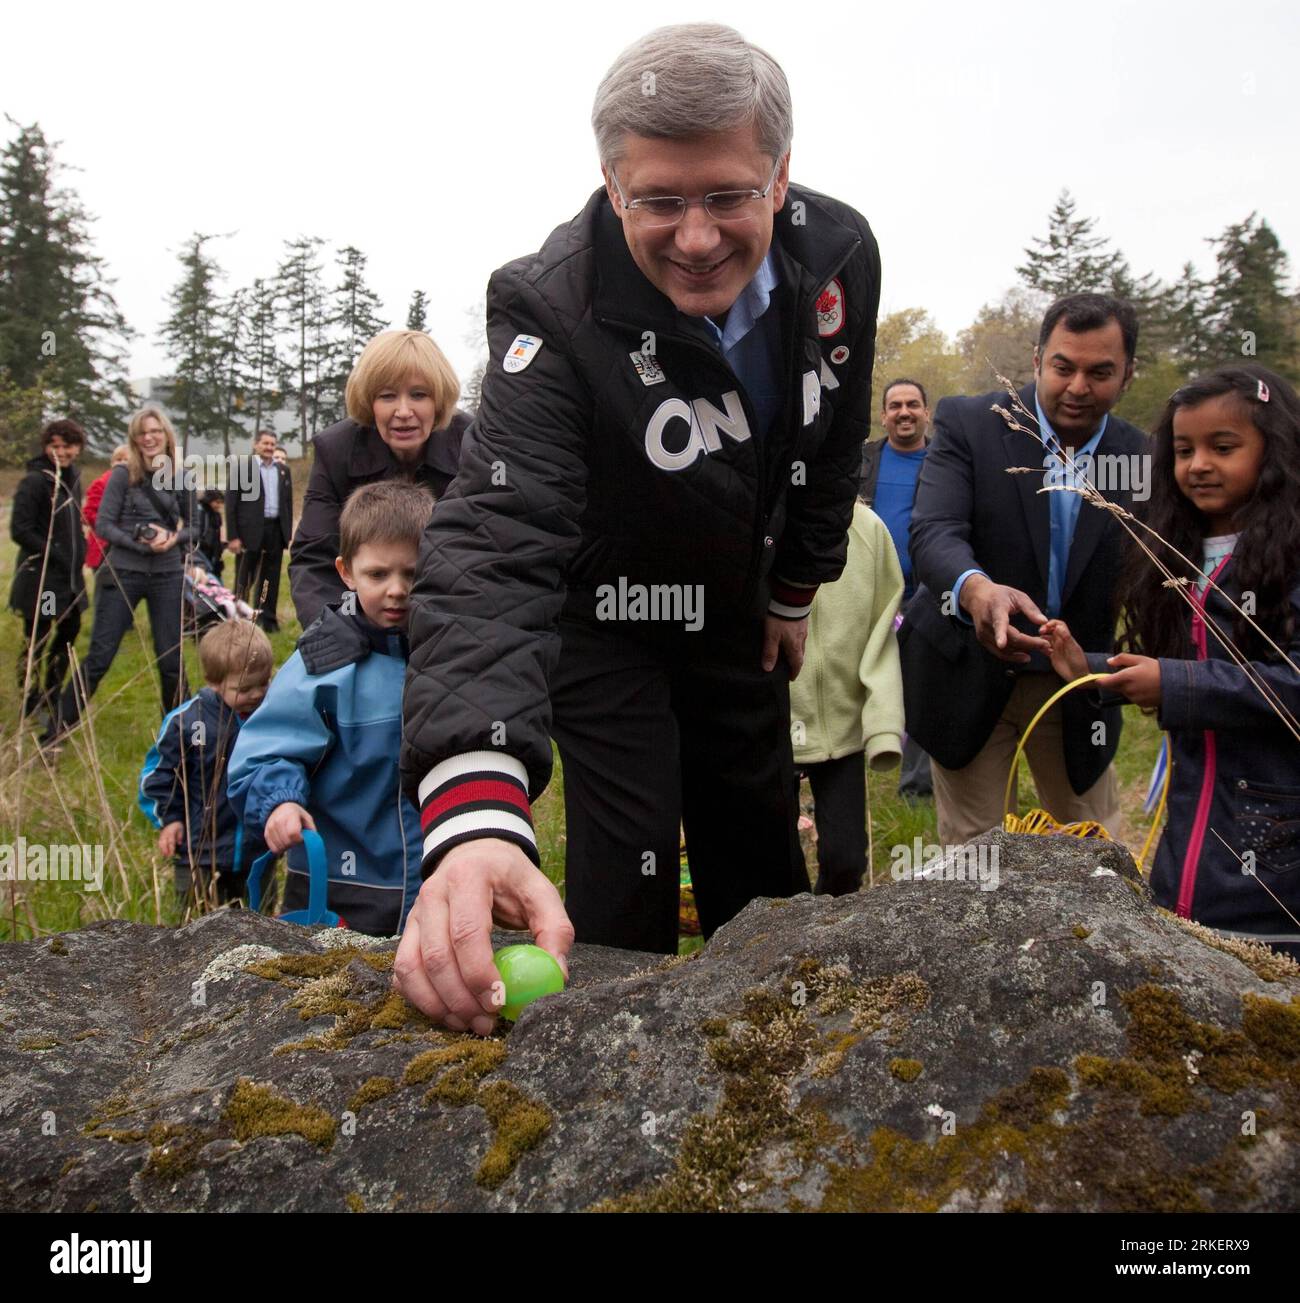 Bildnummer: 55287144  Datum: 24.04.2011  Copyright: imago/Xinhua (110425) -- VANCOUVER, April 25, 2011 (Xinhua) -- Canadian Prime Minister and Conservative Party leader Stephen Harper goes Easter egg hunting with local children in Burnaby, British Columbia, Canada, April 24, 2011. Harper was on a campaign trip for the 41st federal election set on May 2. (Xinhua/Conservative Party of Canada) CANADA-BRITISH COLUMBIA-HARPER-CAMPAIGN PUBLICATIONxNOTxINxCHN People Politik Wahl Präsidentschaftswahlen Wahlen Wahlkampf Kanada kbdig xdp 2011 quadrat premiumd o0 Ostern, Osterei, Ei, Suche, Eiersuche, Os Stock Photo